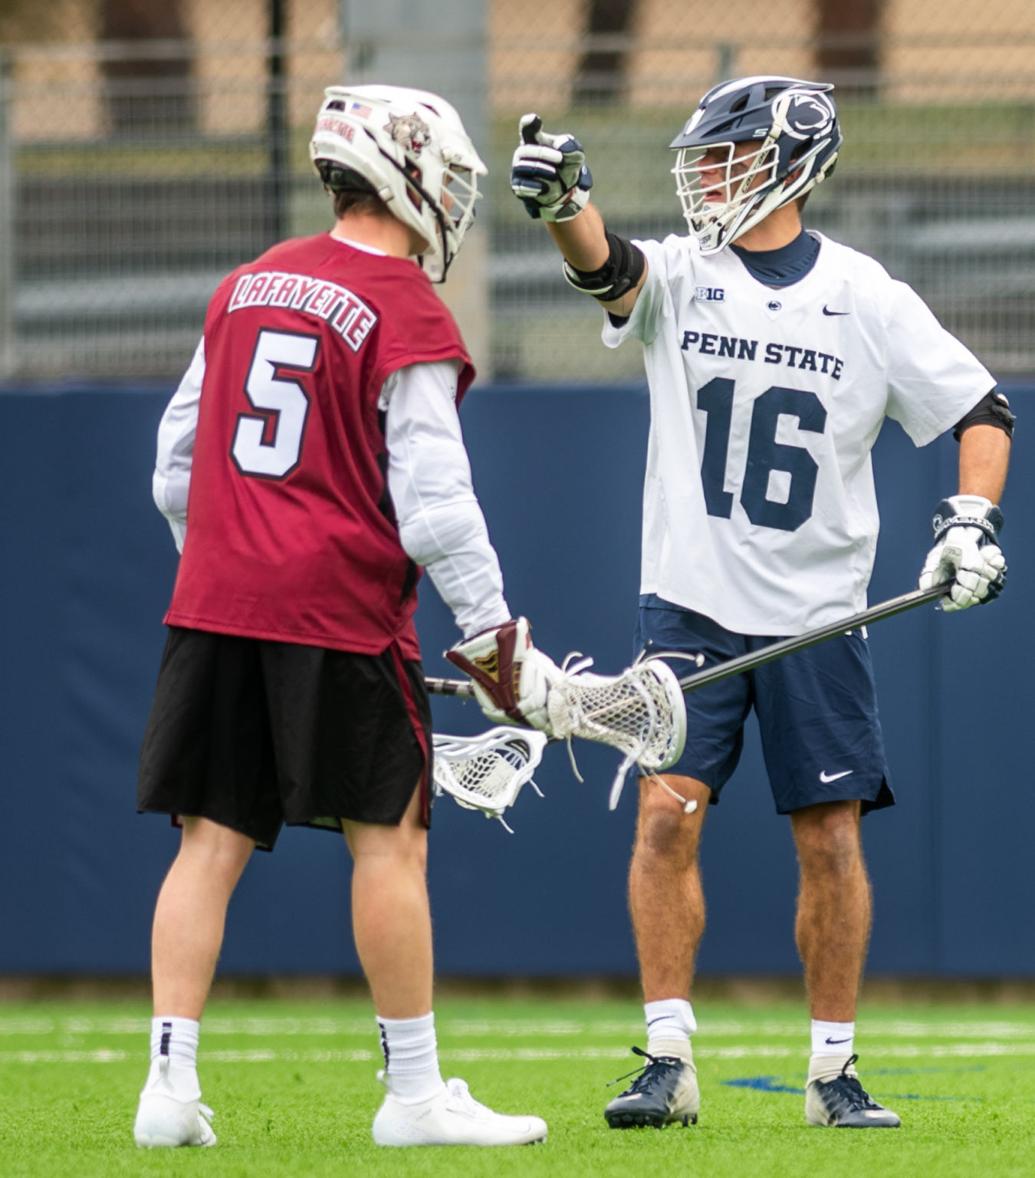 Penn State men’s lacrosse alltime team Who are the best players in